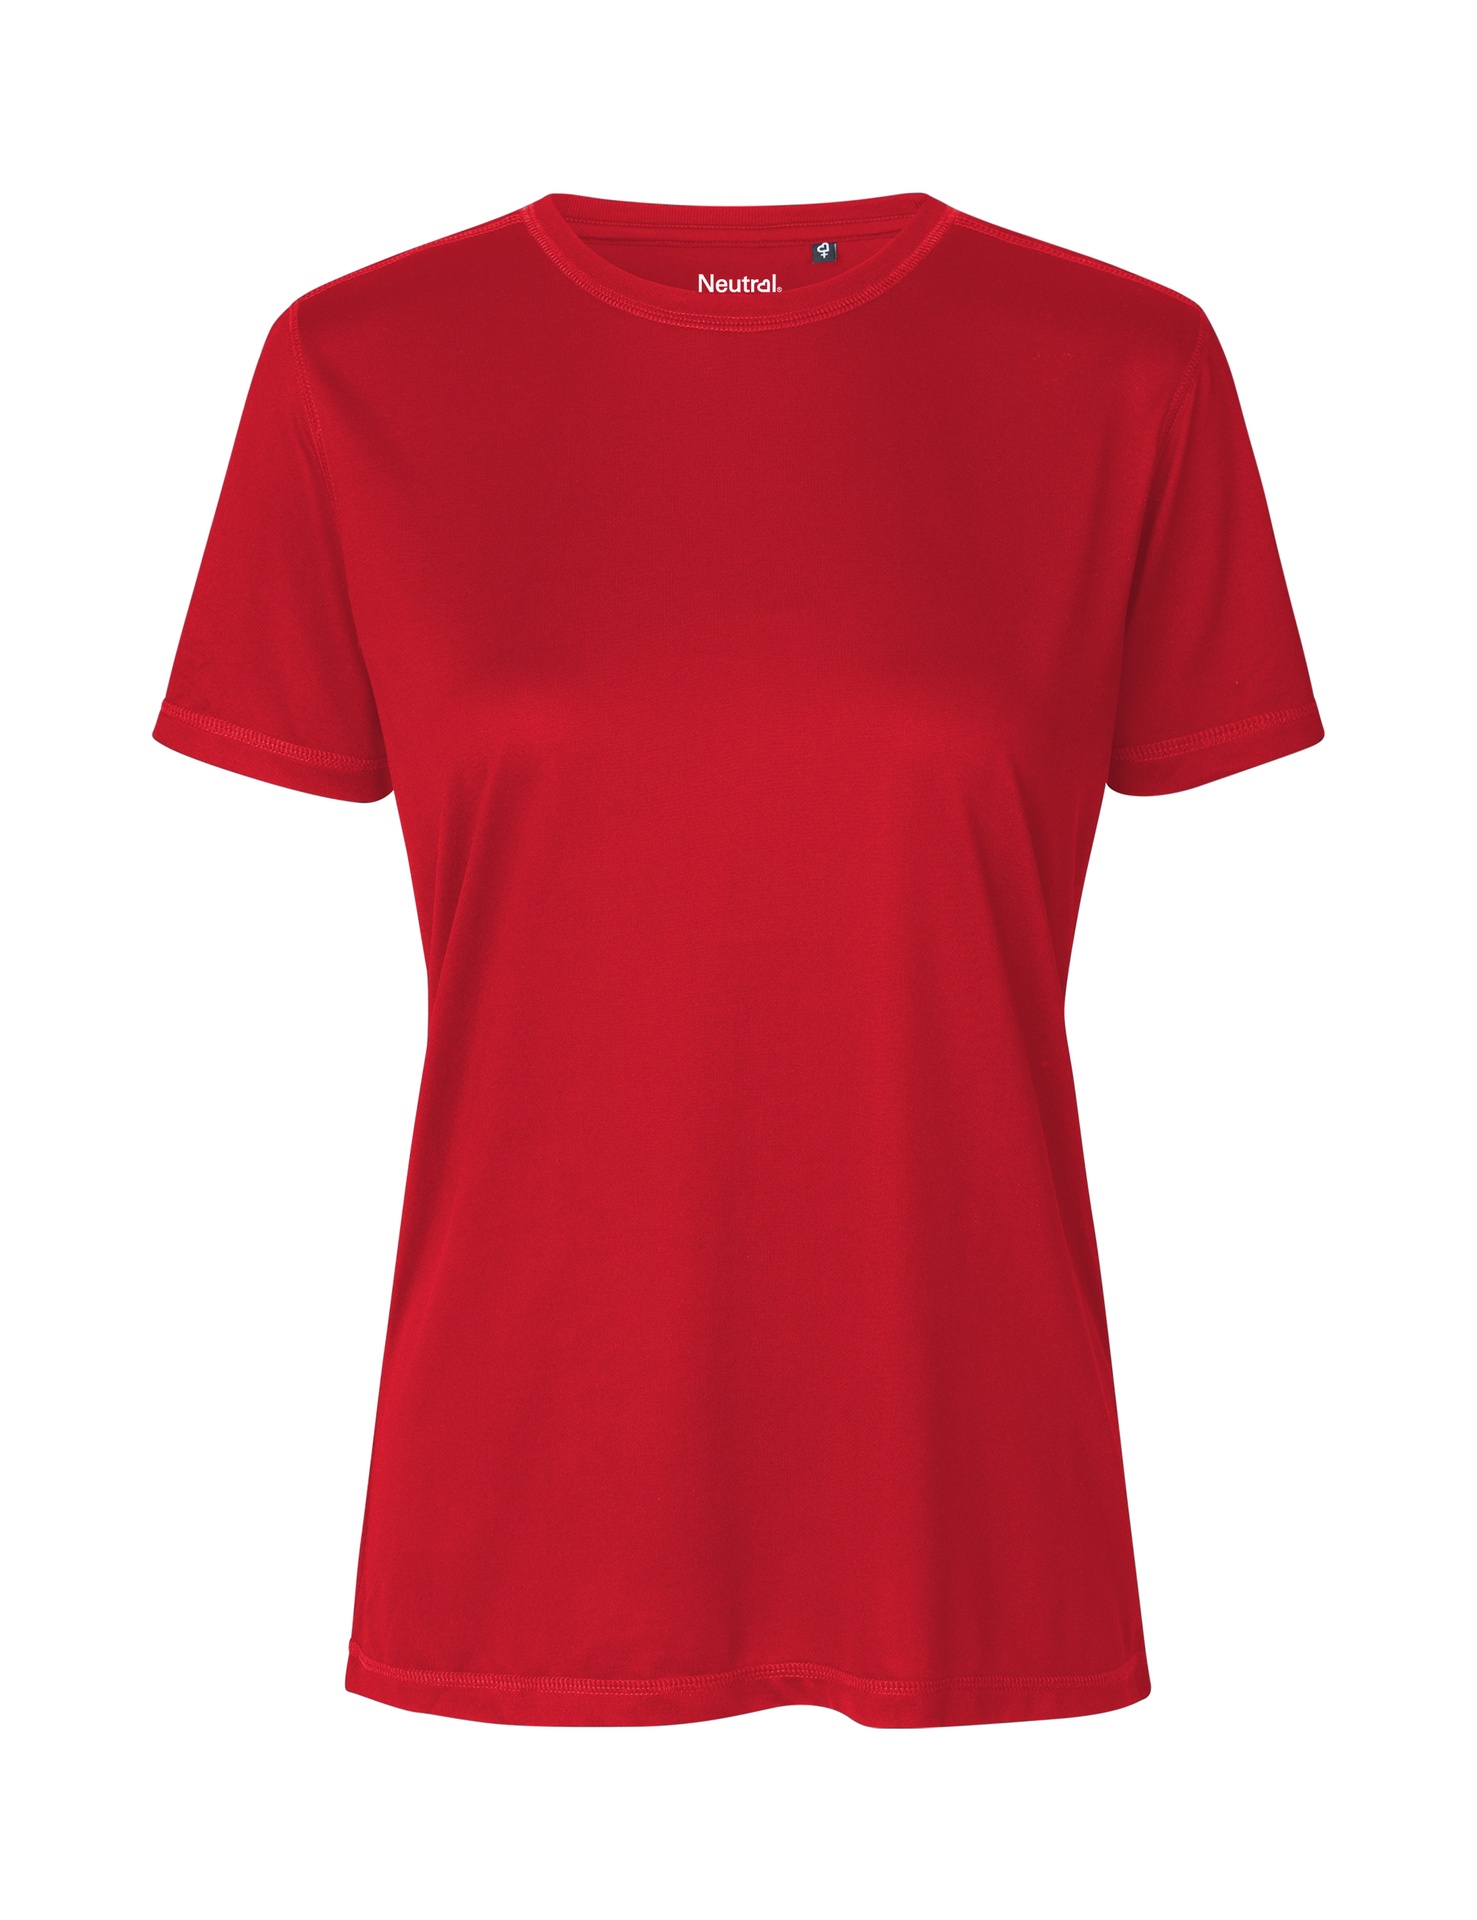 [PR/05211] Ladies Recycled Performance T-Shirt (Red 05, S)